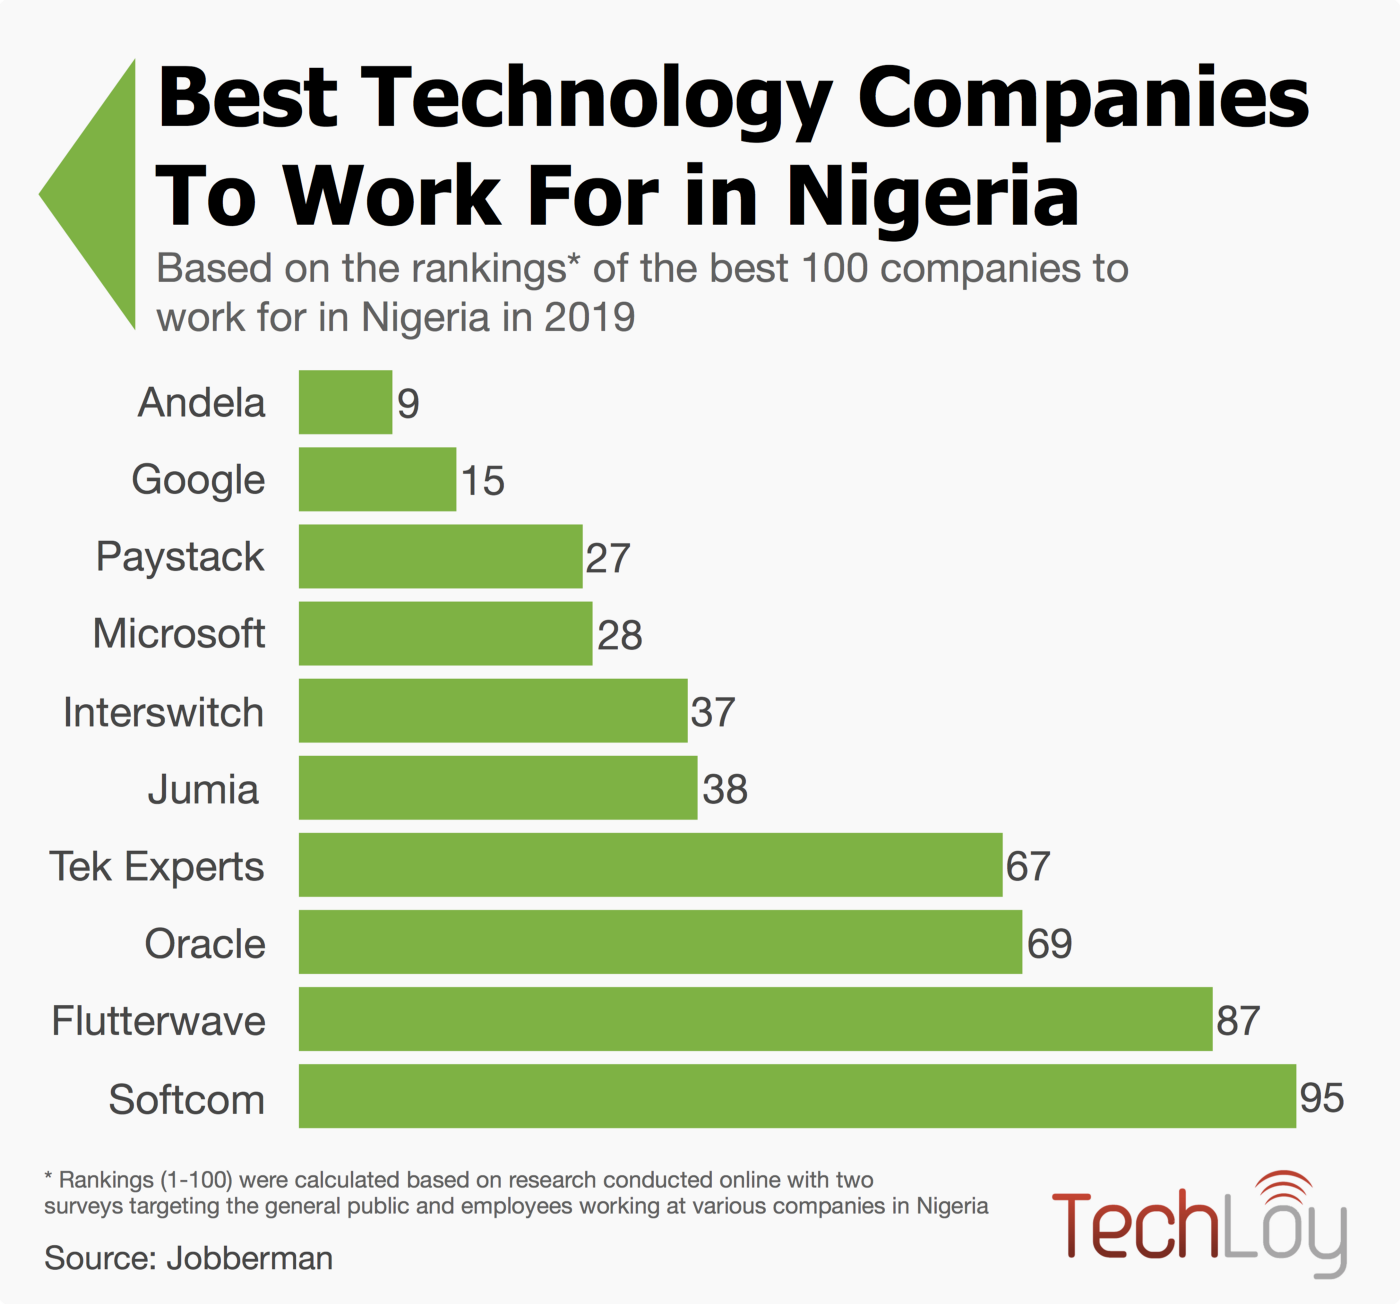 The Best Technology Companies To Work For in Nigeria